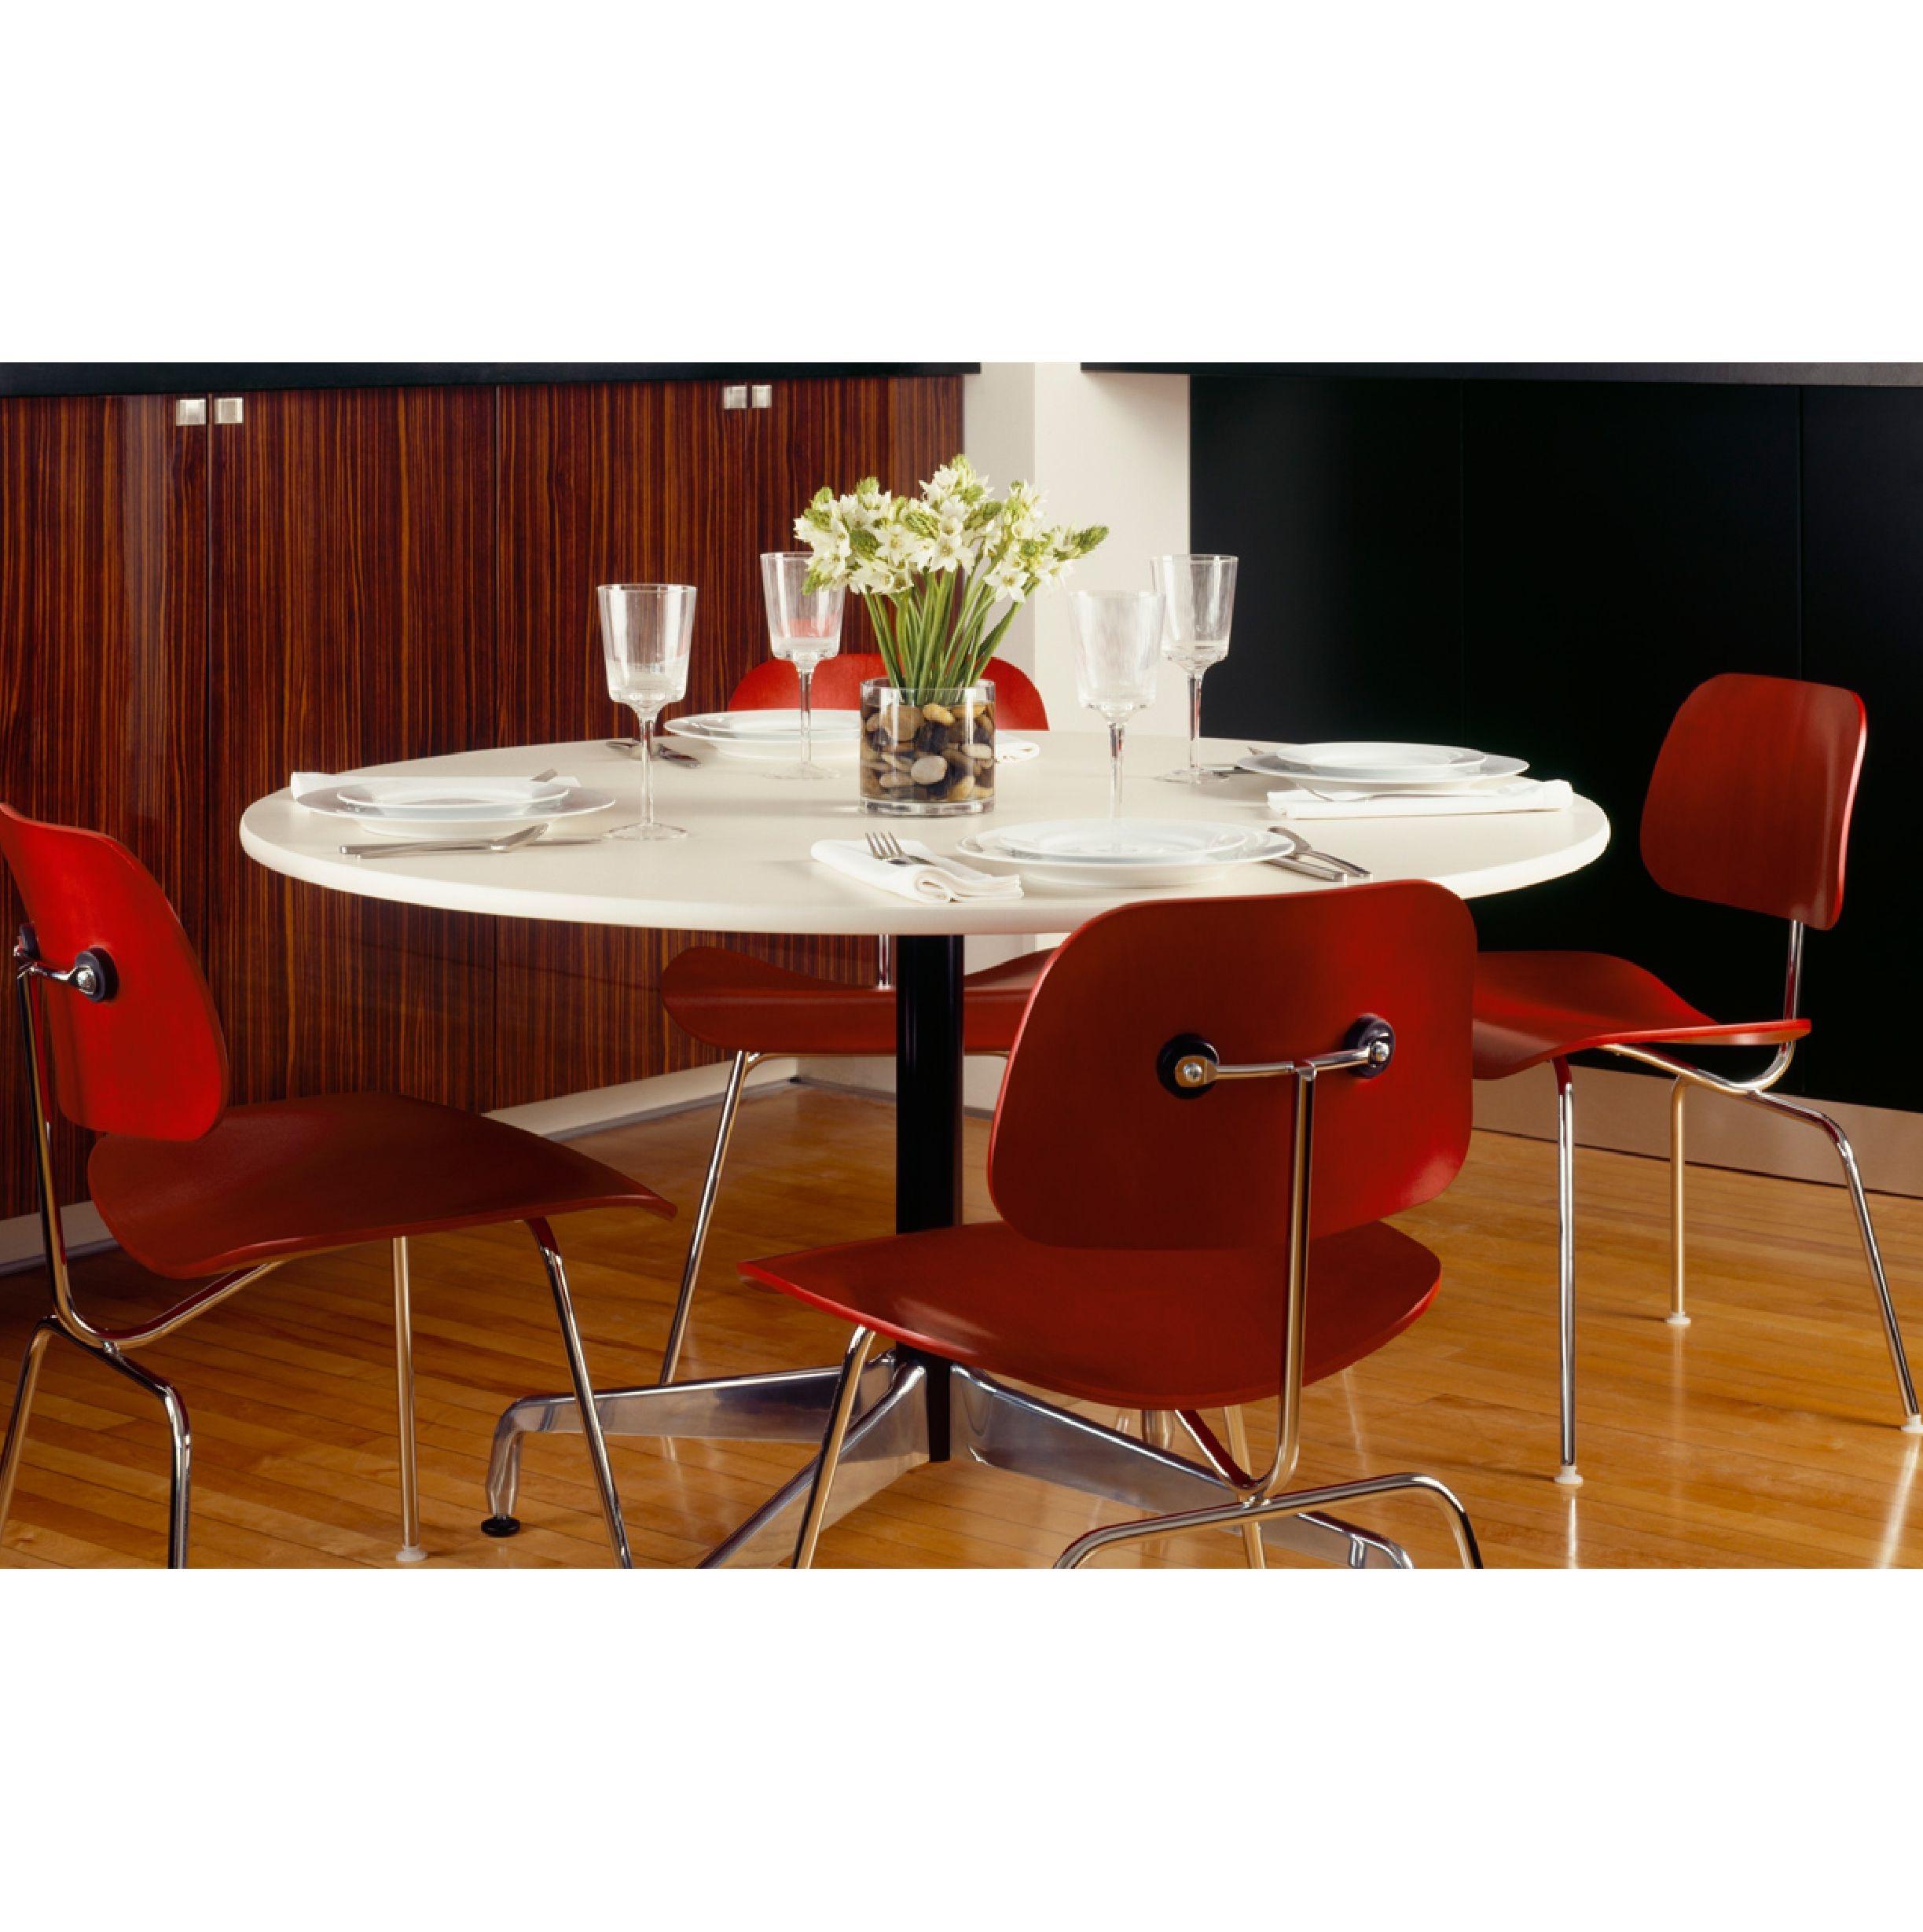 Charles and Ray Eames Red Beech DCM Chair, Herman Miller, Dining, Beistellstuhl 1